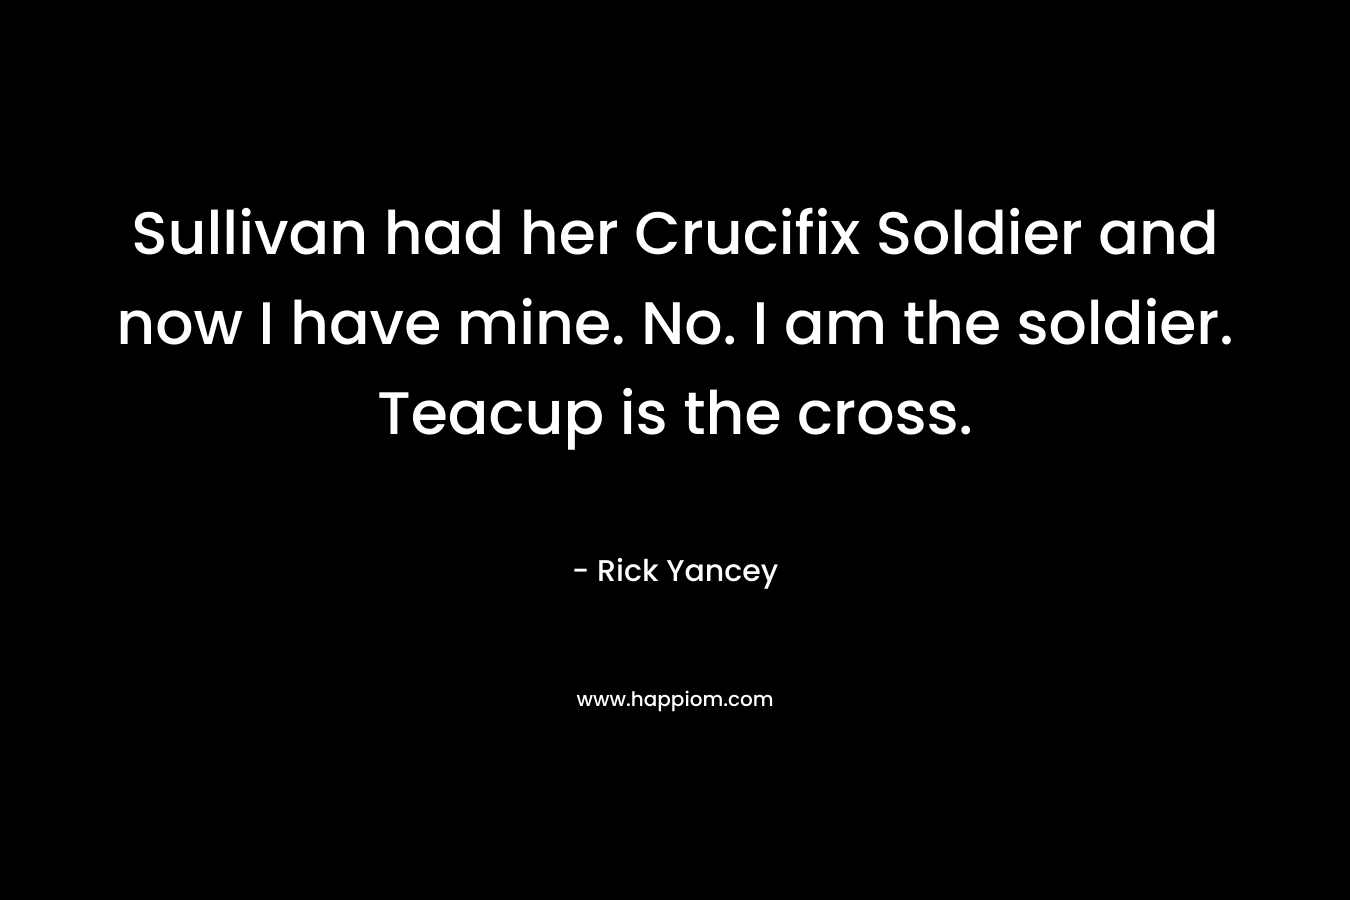 Sullivan had her Crucifix Soldier and now I have mine. No. I am the soldier. Teacup is the cross. – Rick Yancey